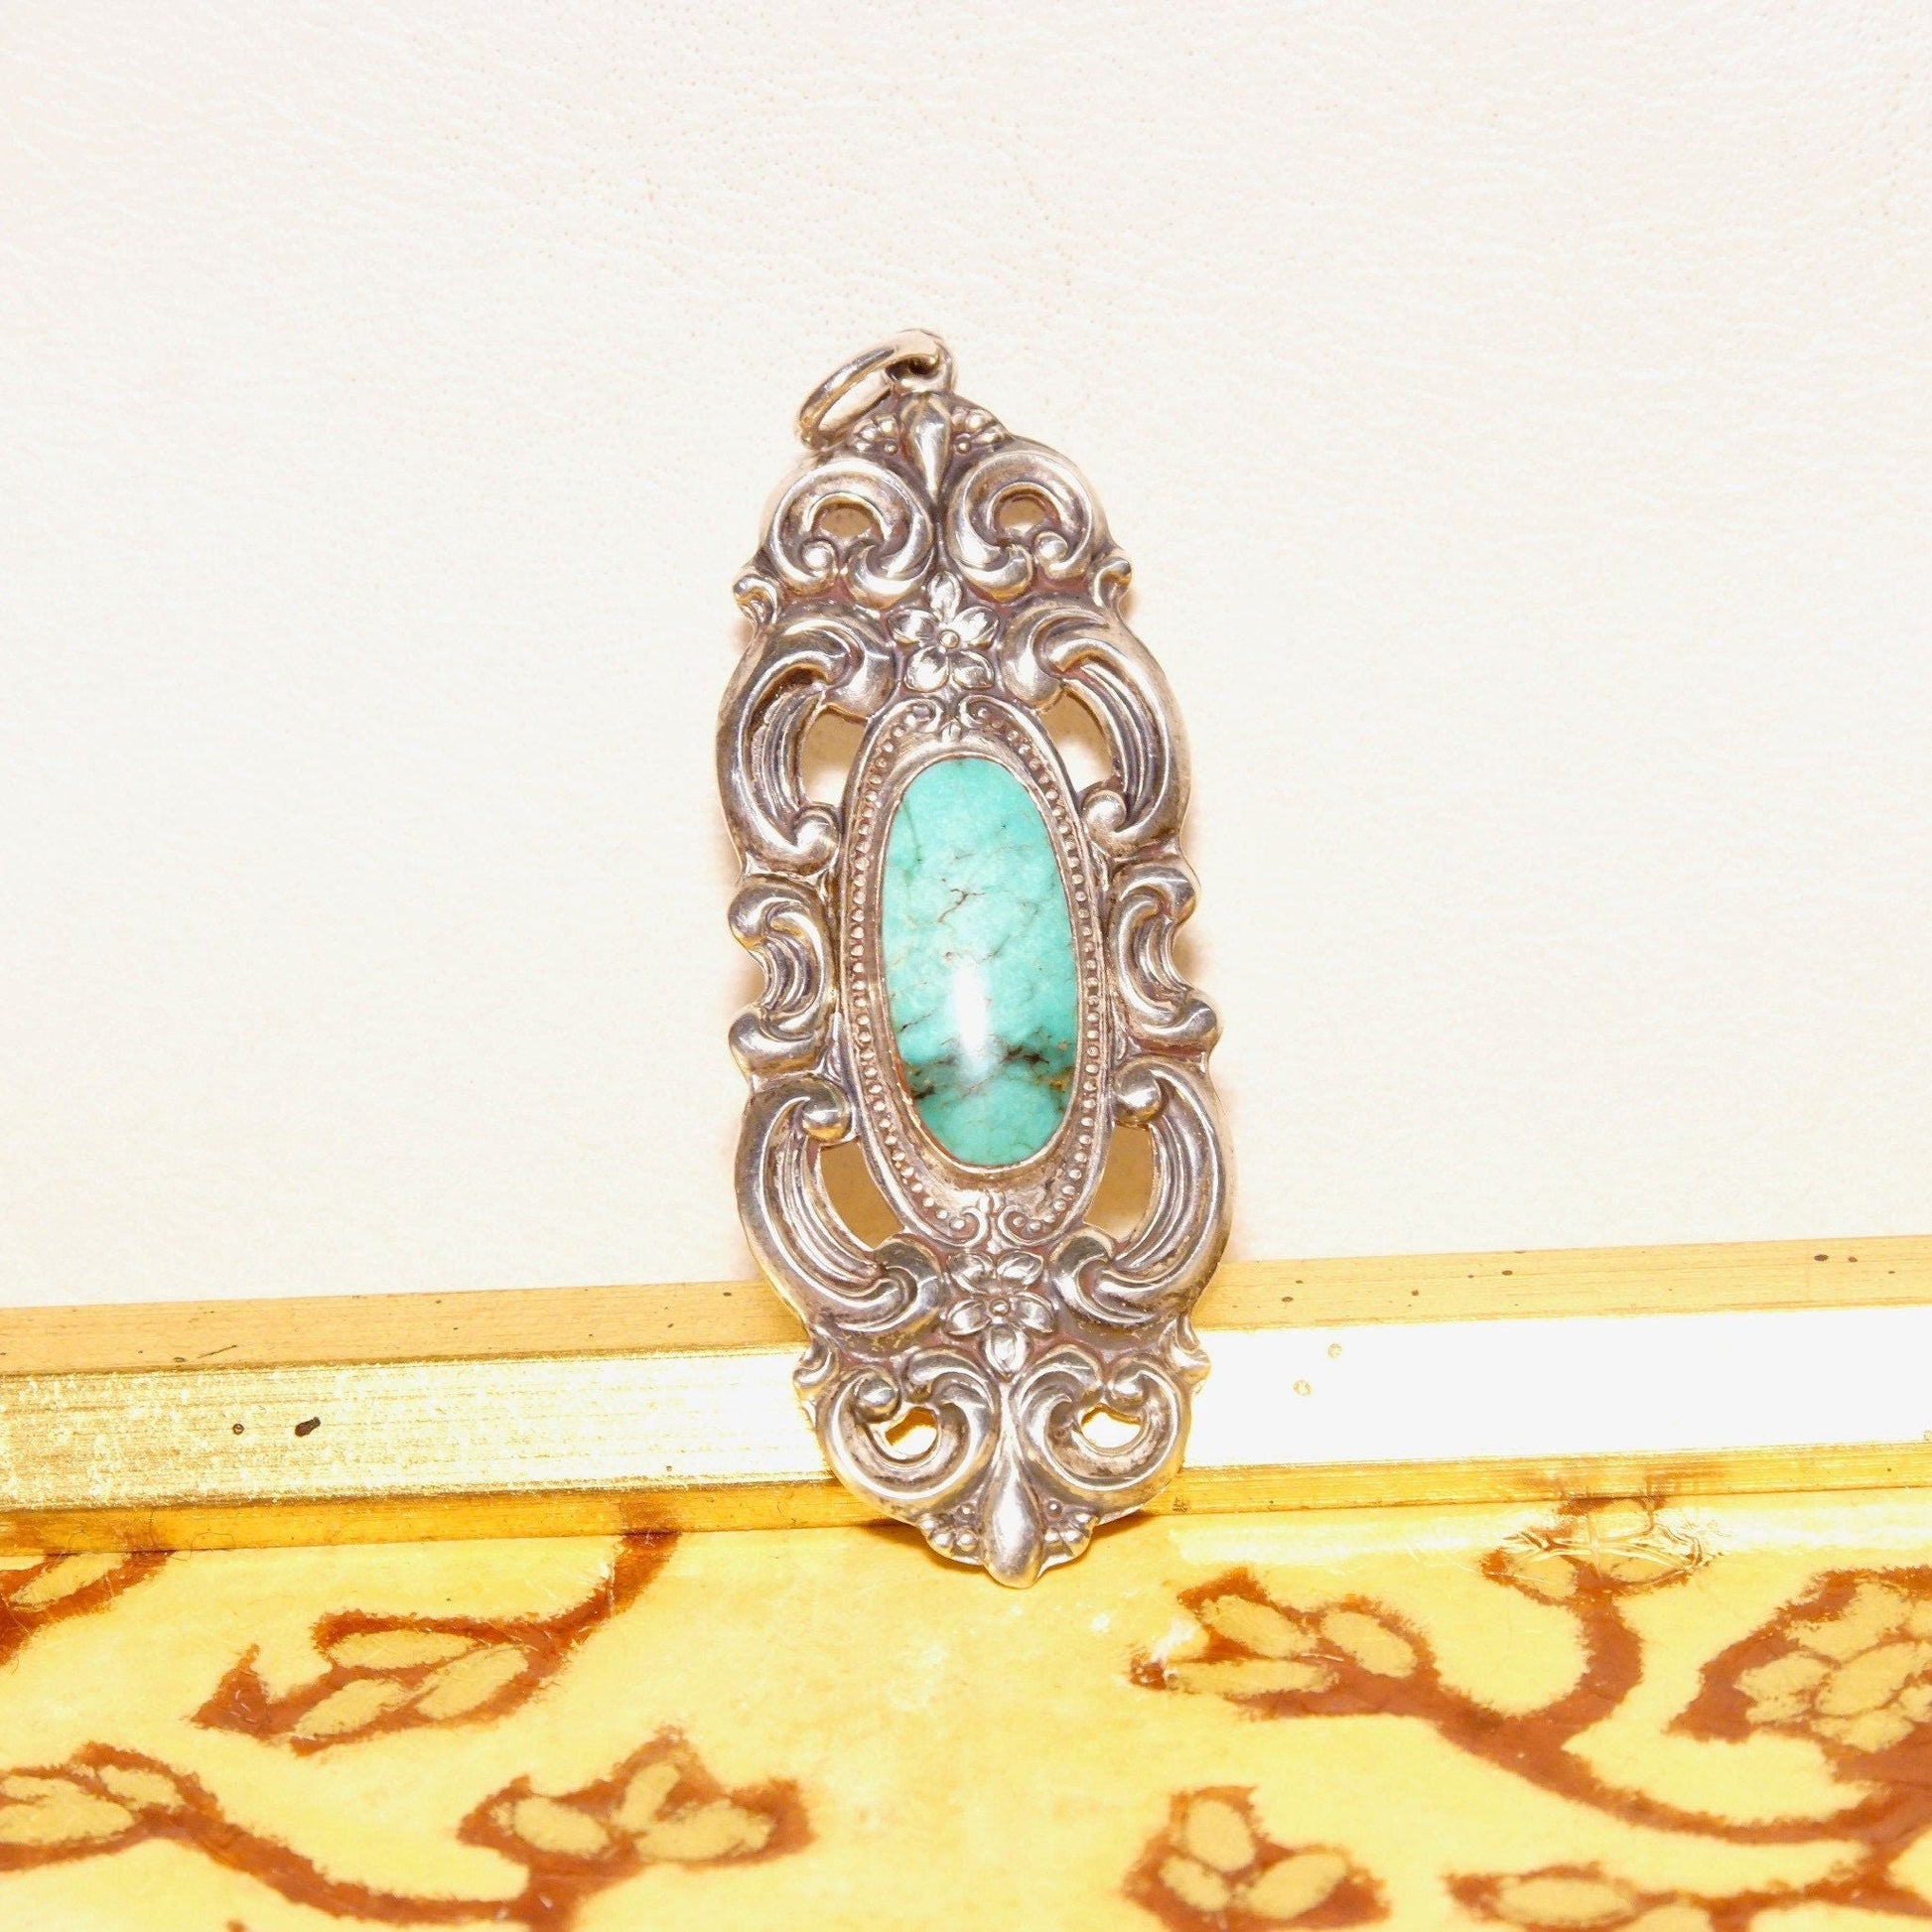 Vintage Towle sterling silver pendant with ornate embossed repousse designs, featuring a turquoise cabochon at the center. The pendant has an art nouveau style with intricate floral motifs and scrollwork, measuring 2 3/4 inches in length.